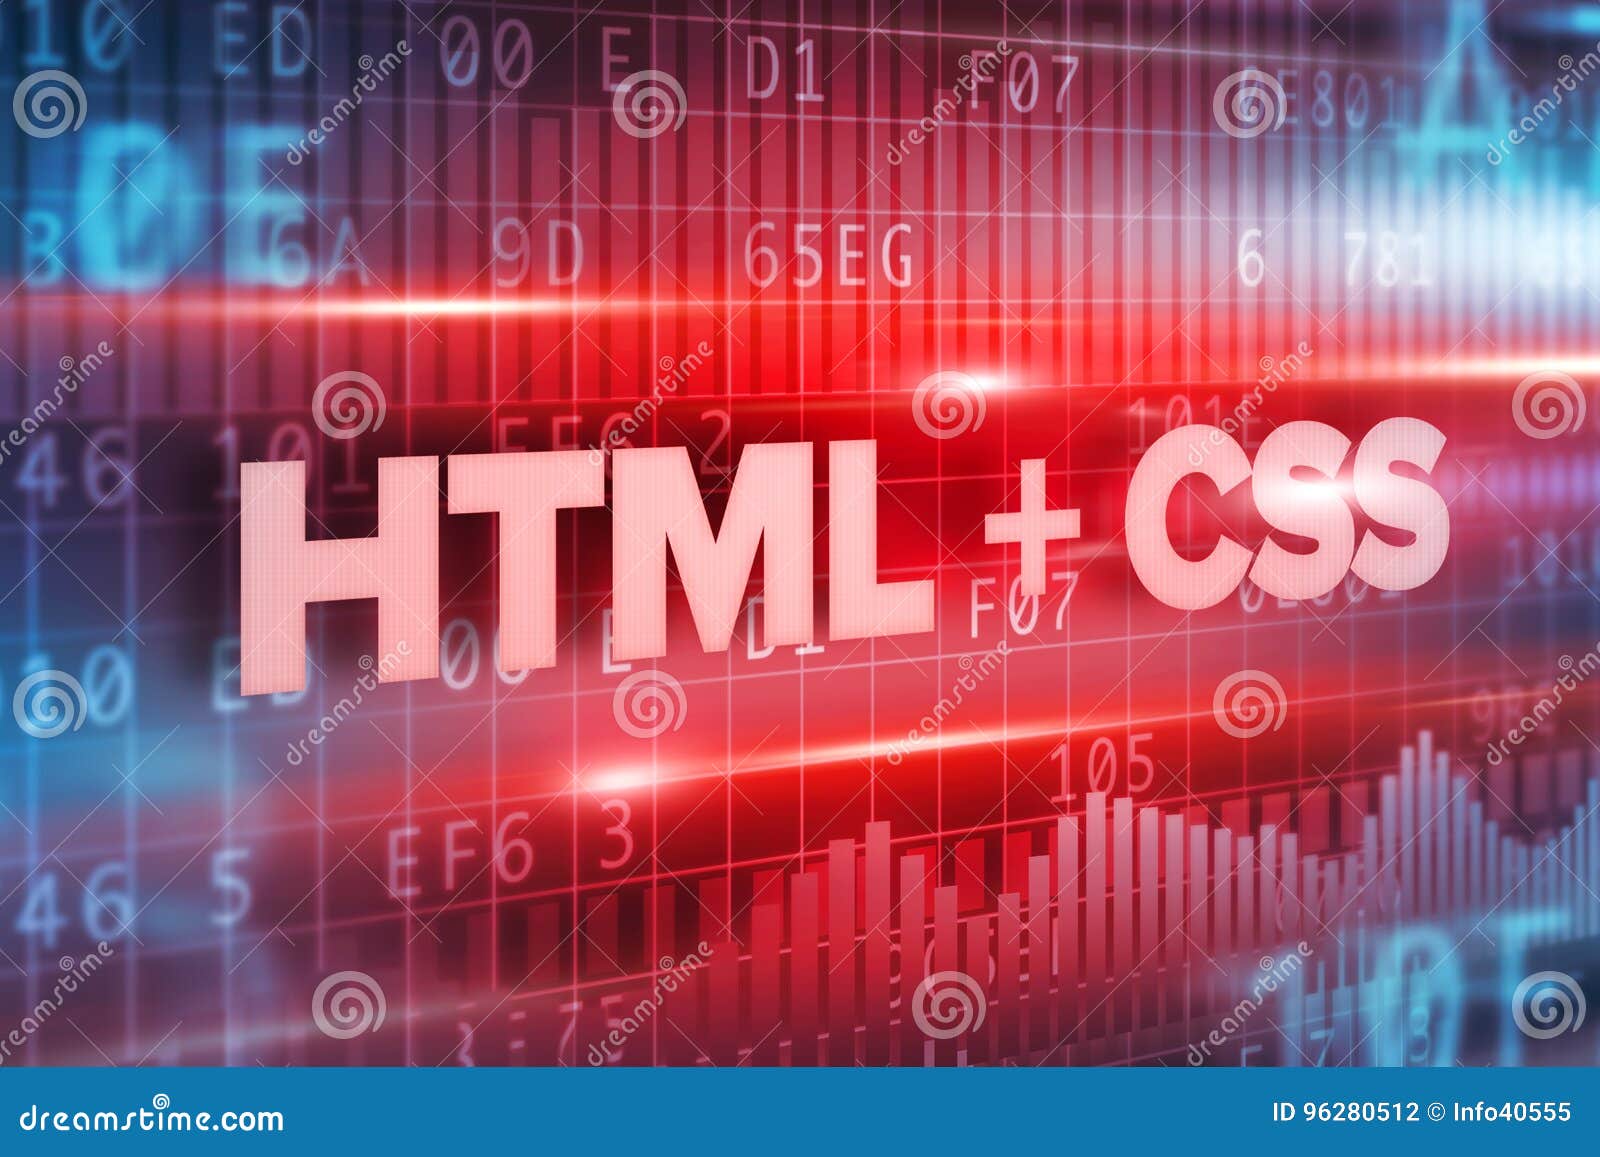 HTML and Css Abstract Concept Blue Text Blue Background Stock Illustration  - Illustration of media, communication: 96280512